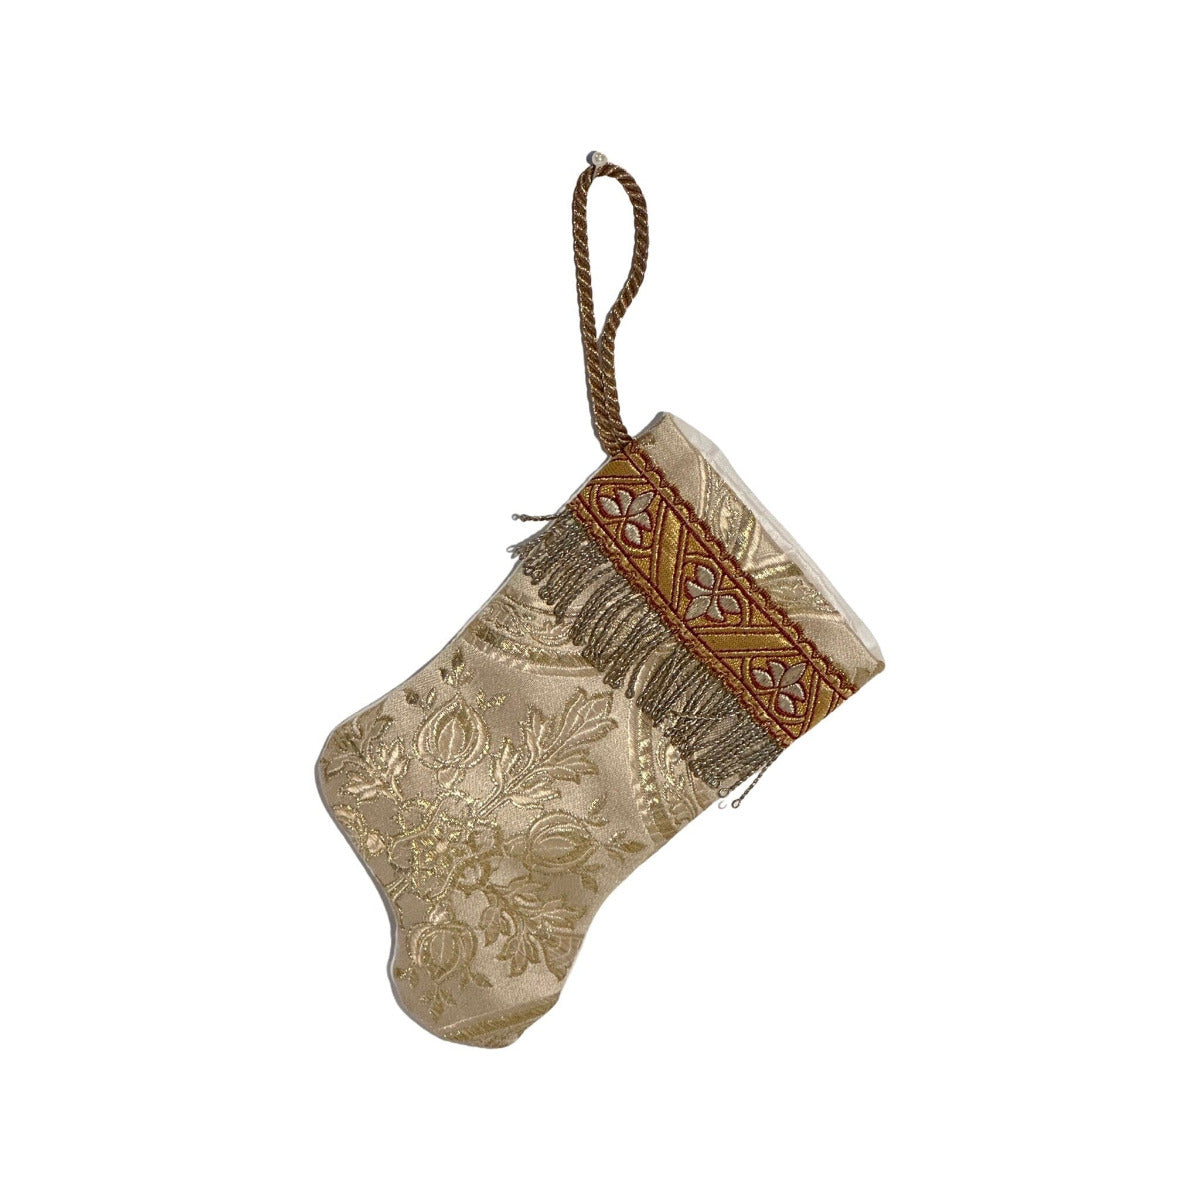 Handmade Mini Stocking from Antique Textiles - Ivory, Gold